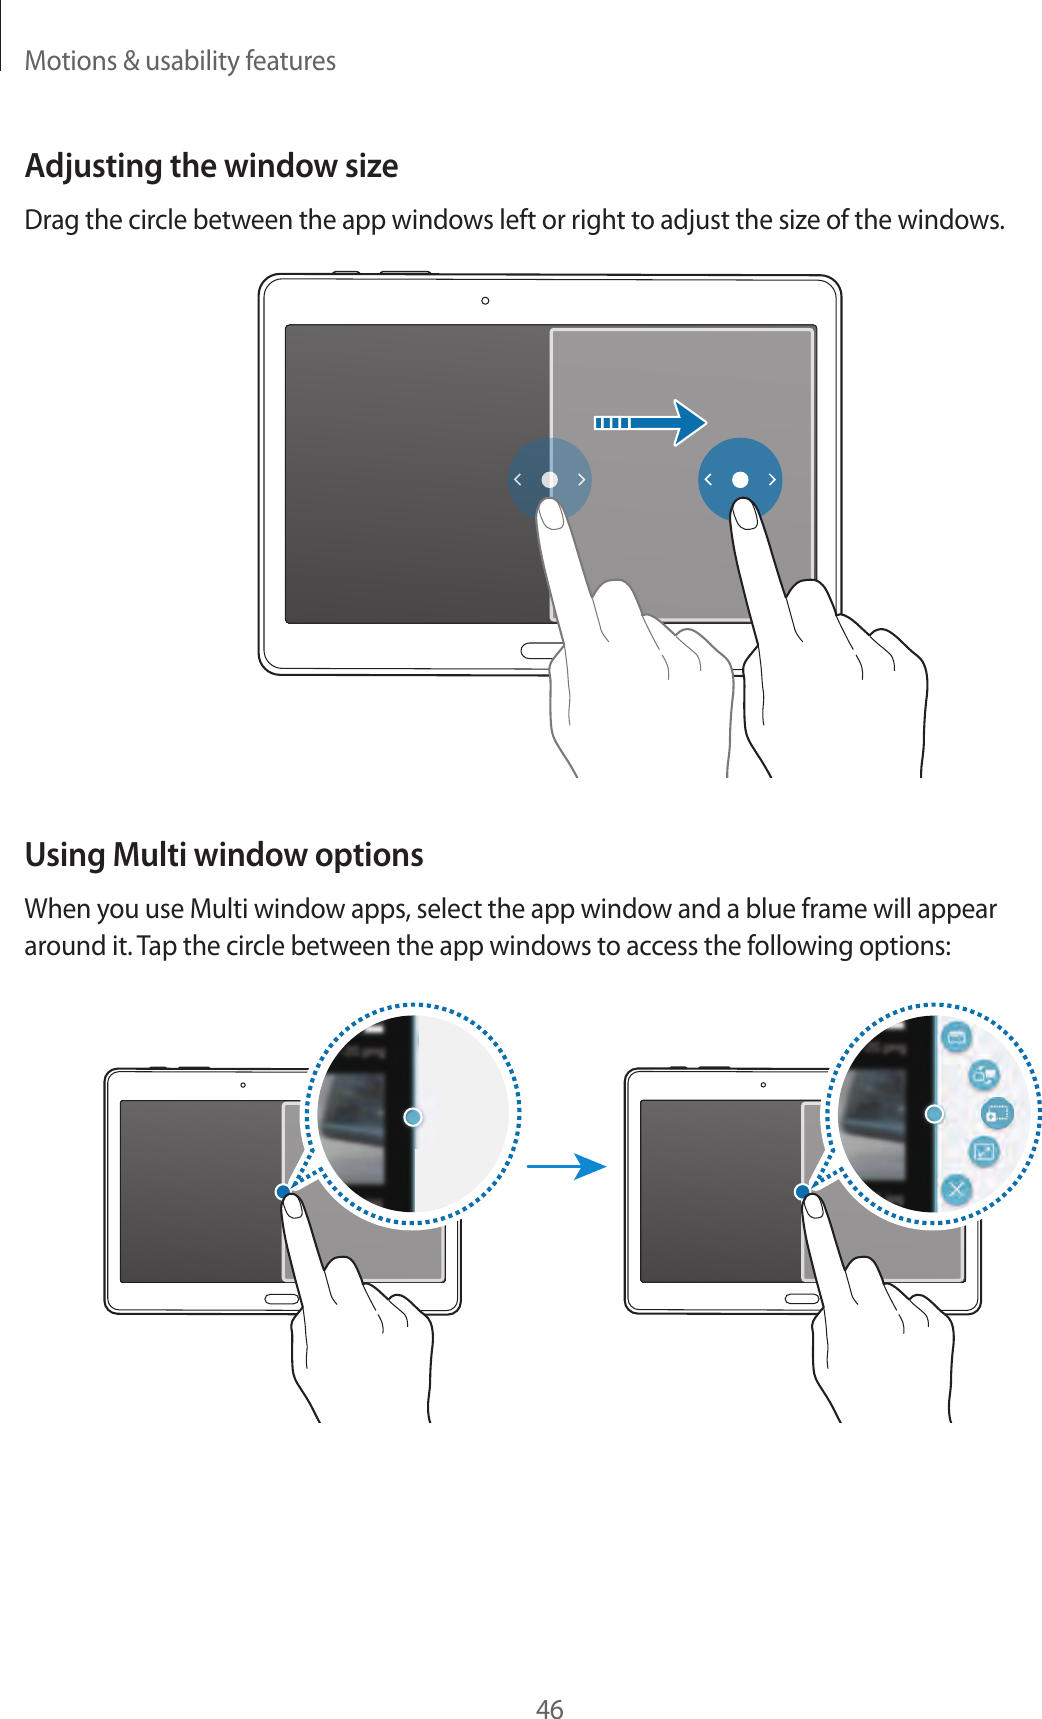 Motions &amp; usability features46Adjusting the window sizeDrag the circle between the app windows left or right to adjust the size of the windows.Using Multi window optionsWhen you use Multi window apps, select the app window and a blue frame will appear around it. Tap the circle between the app windows to access the following options: